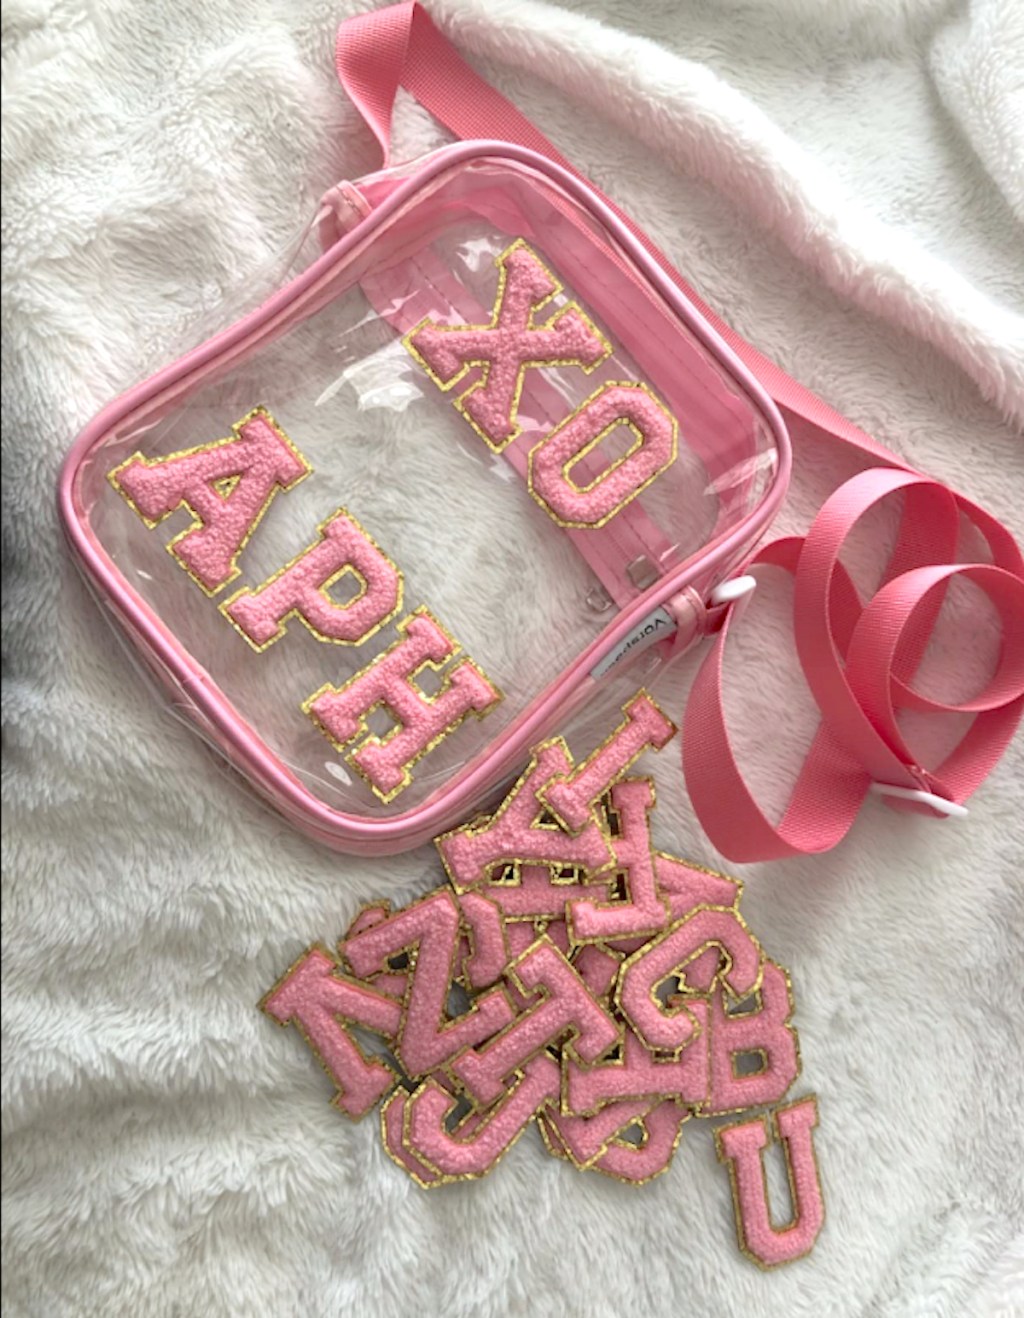 pink letter patches on clear bag laying on white fur blanket